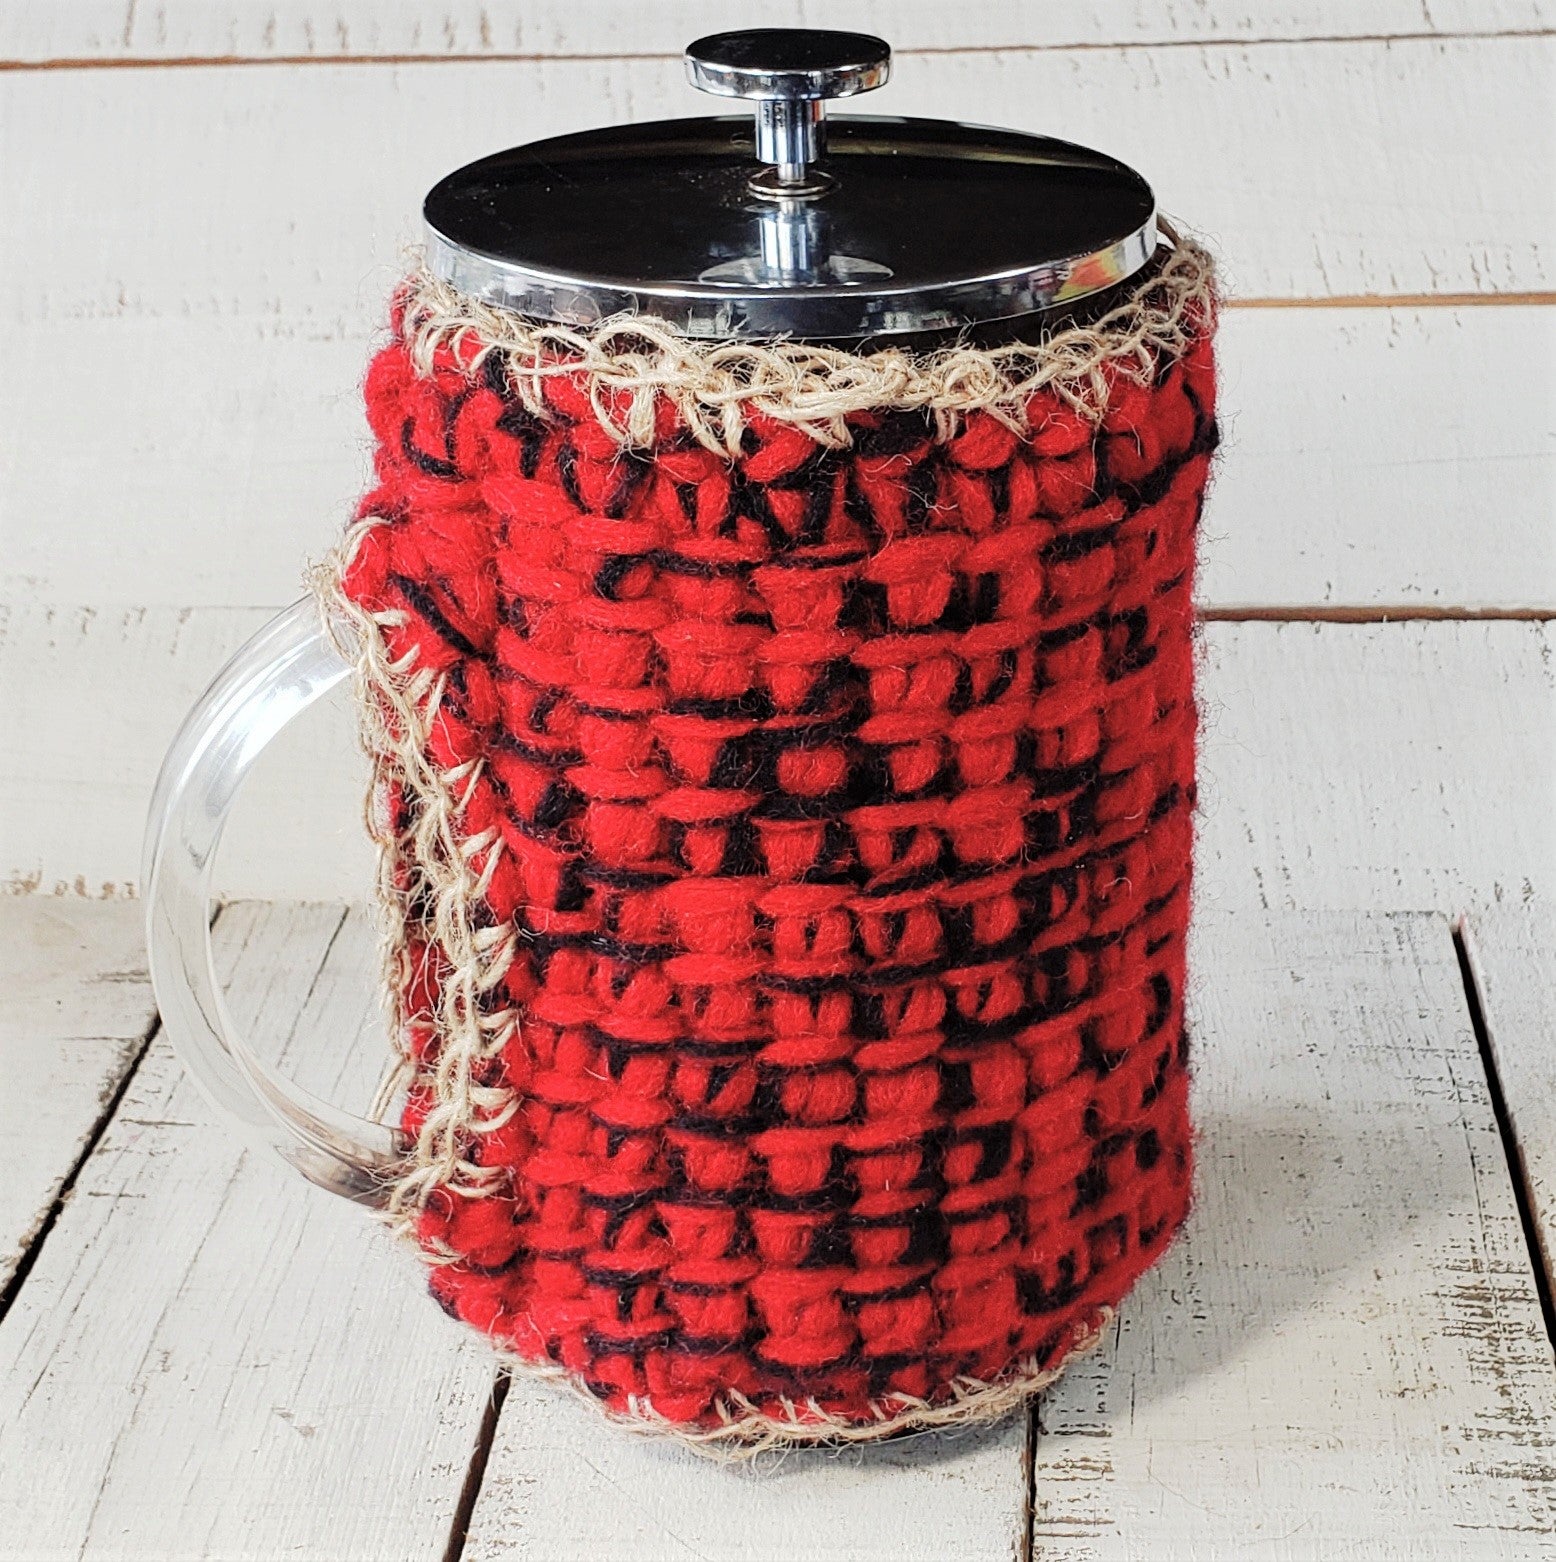 French Press Cozy, Cafetiere, Bean Blanket, Bean Belt Cover- Brick Red,